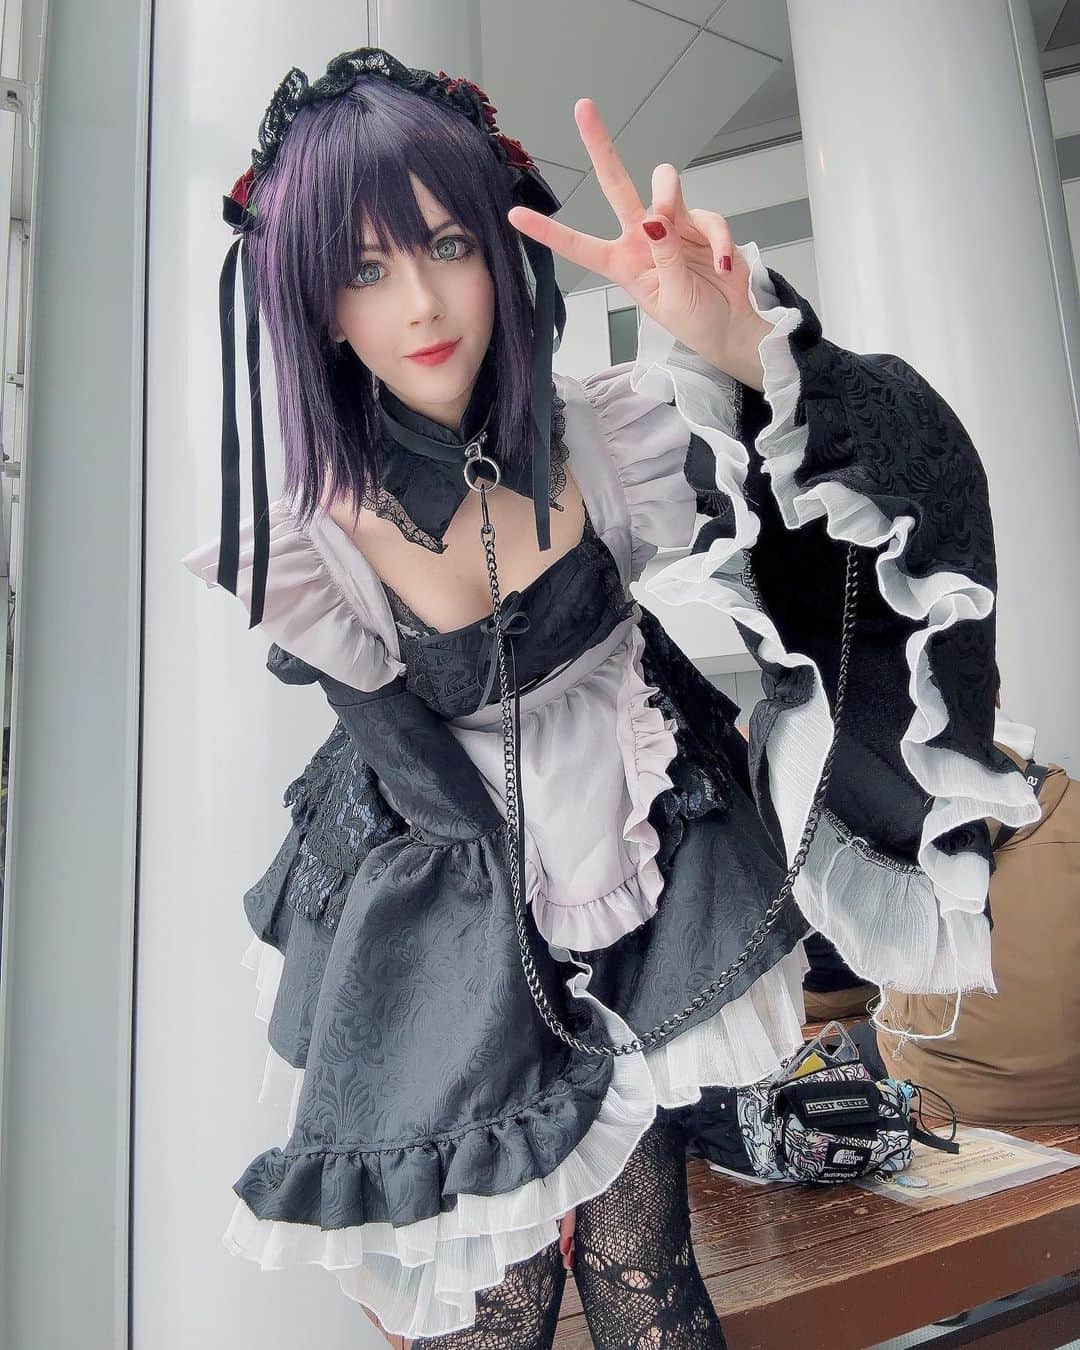 Hirari Ann（ヒラリー アン）のインスタグラム：「Thanks for comiket! It was fun! What do you think of my dress up darling cosplay? 💕😅  Today I reunited with my cameraman @yoshiro.hori !  One of my favorite people 🙏💕 first time in over 2 years!🥲 we laughed so much!」